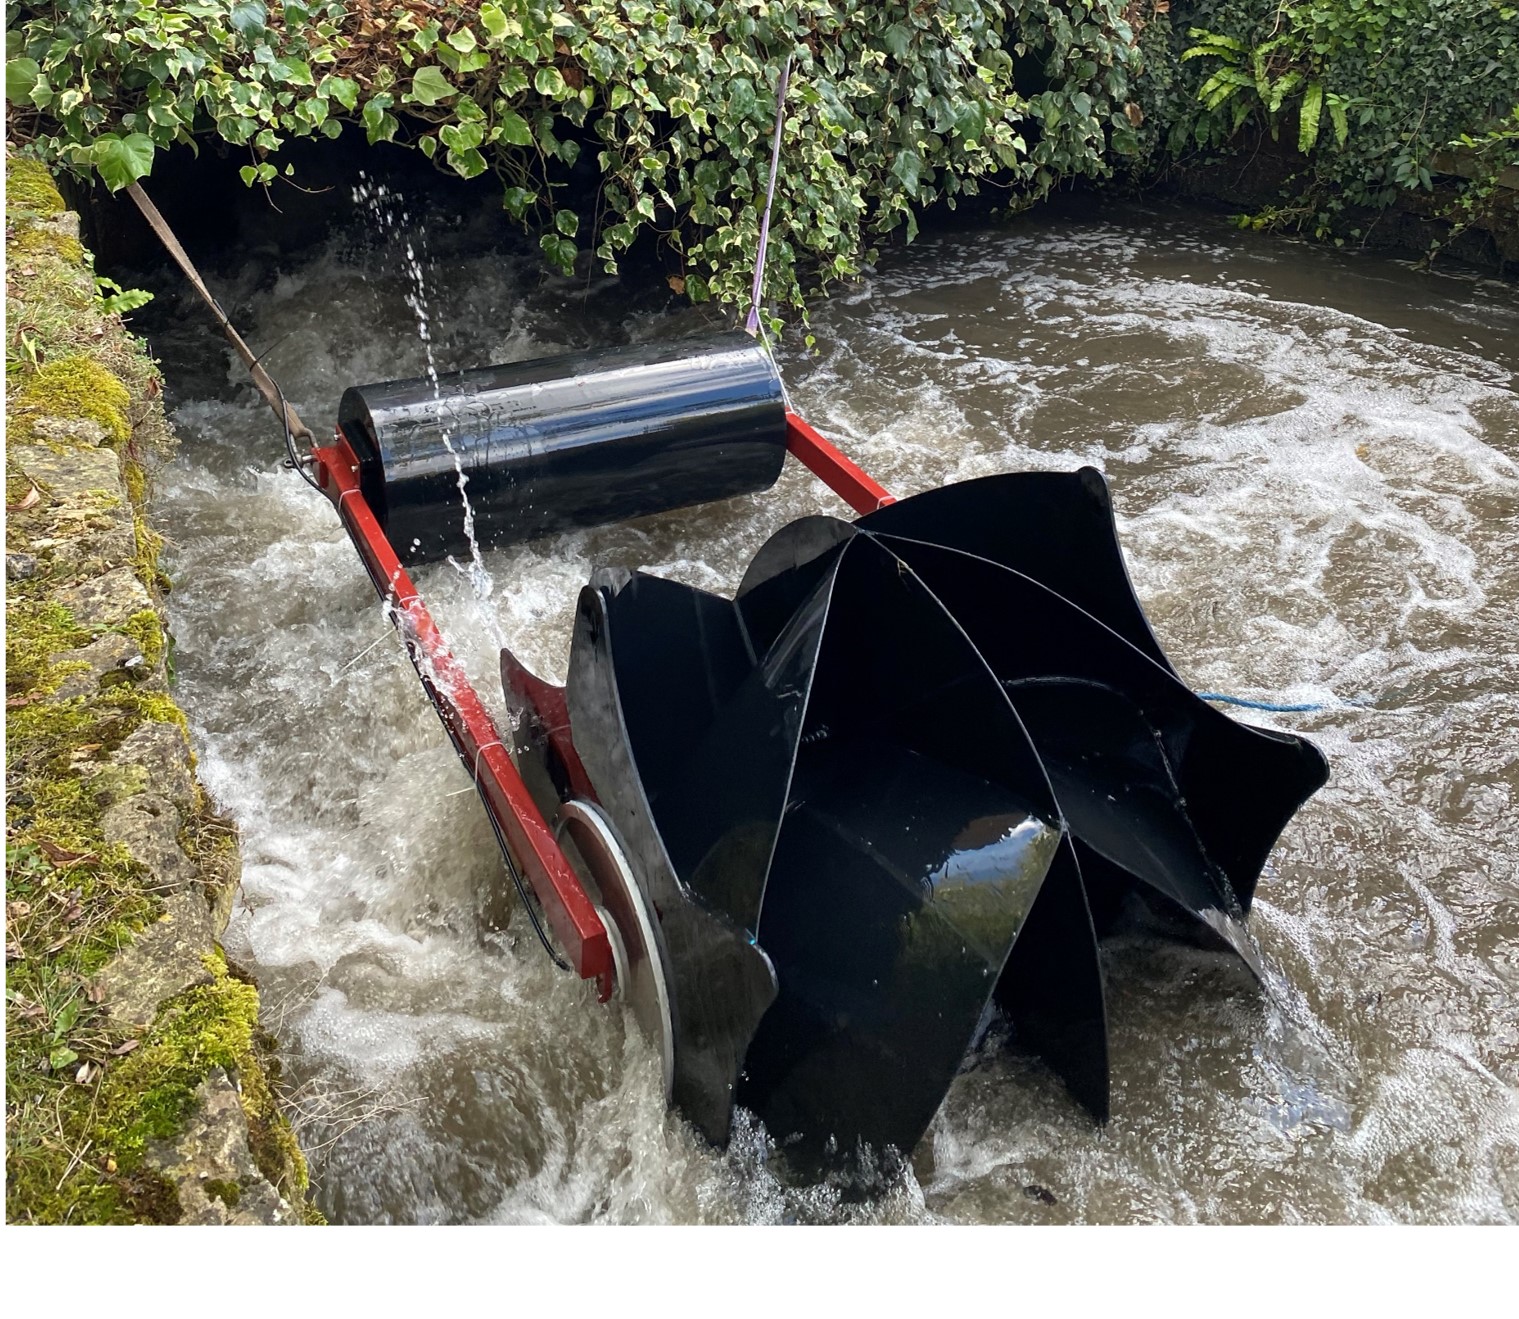 Investigating a Low-Impact Hydro Electricity Pilot Scheme for the River Colne